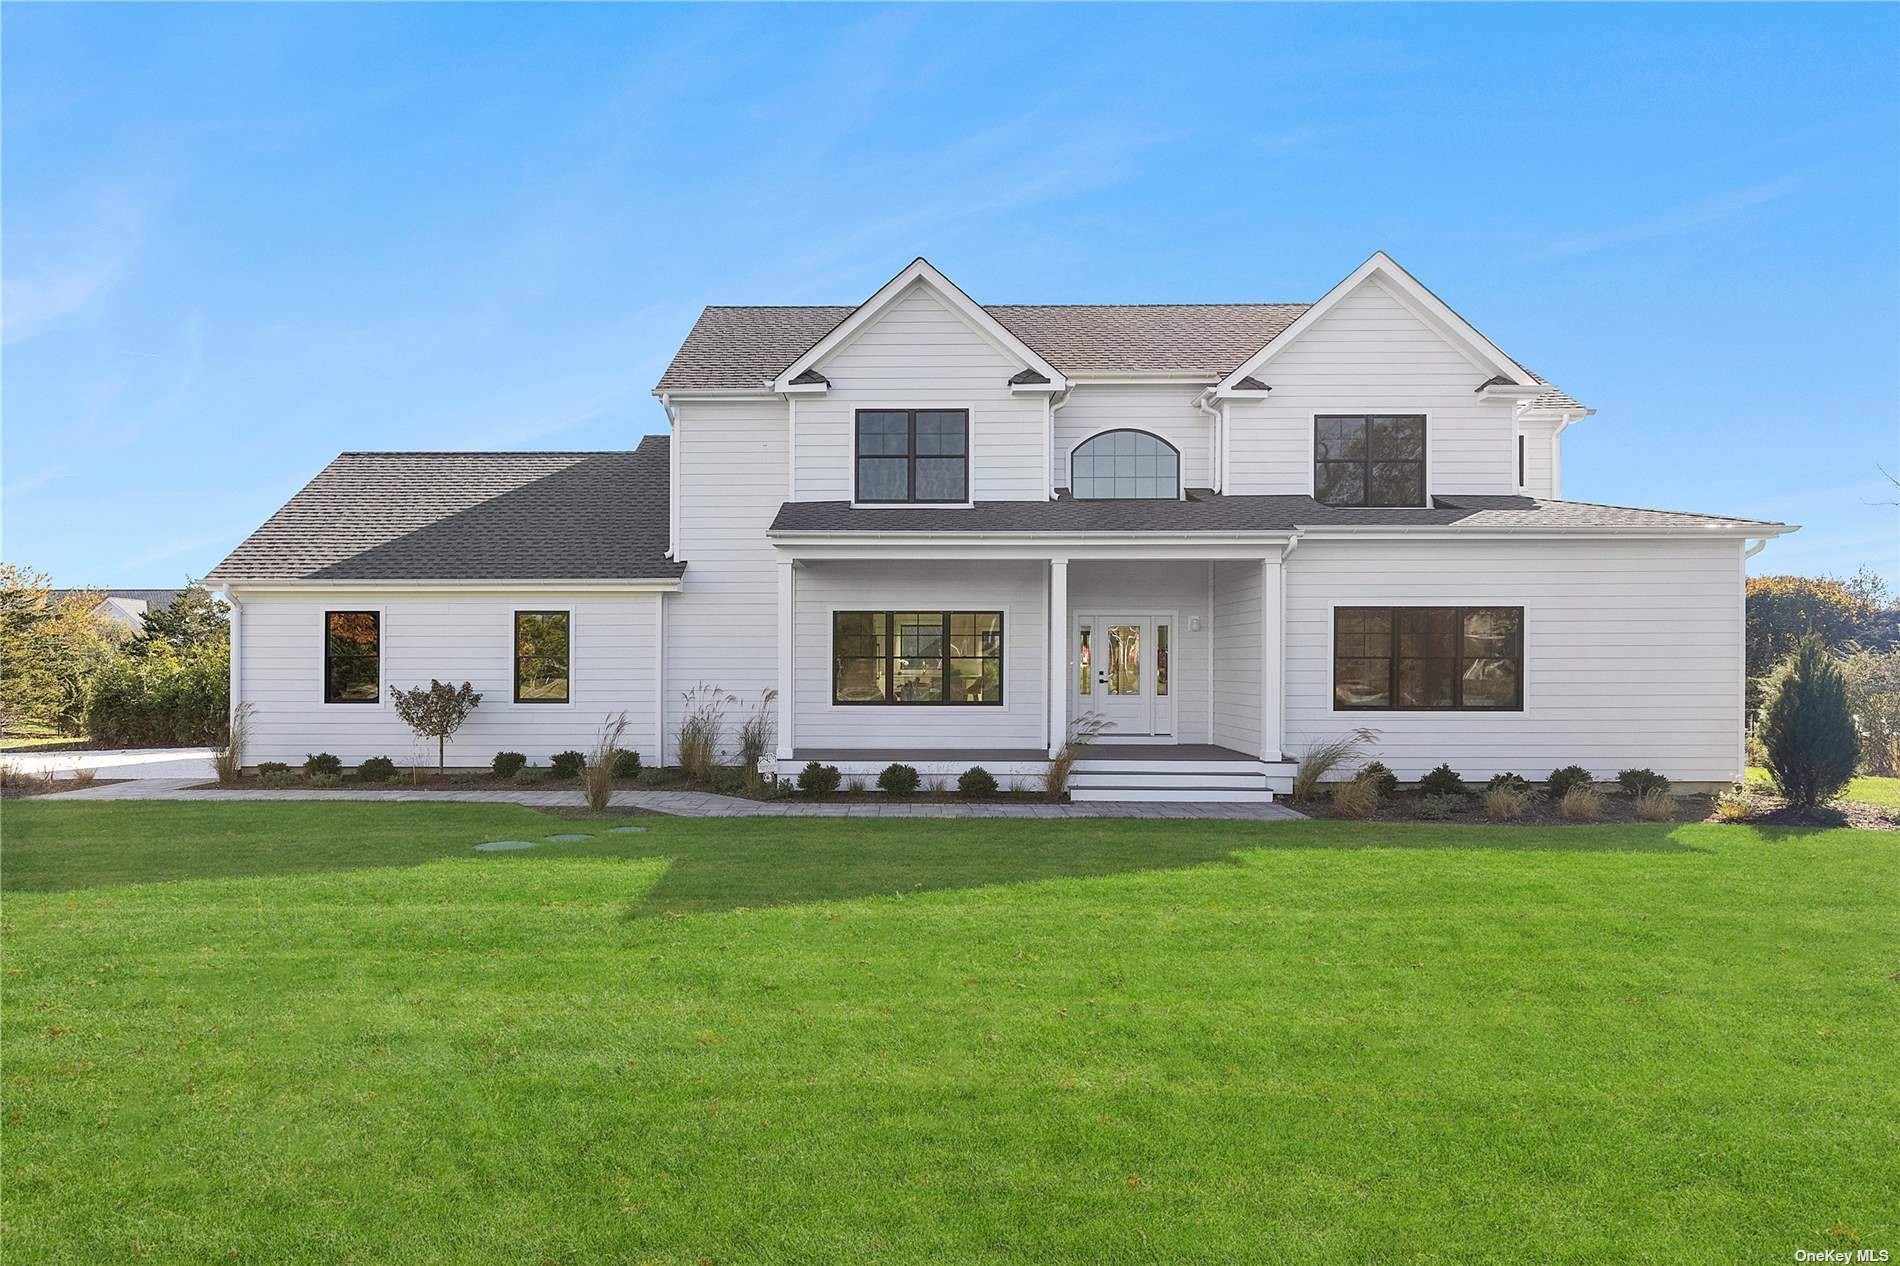 Welcome to this stunning newly constructed home by master builder, Southampton Building Co, in the exclusive South Bay Hampton Estates of Southampton Town.